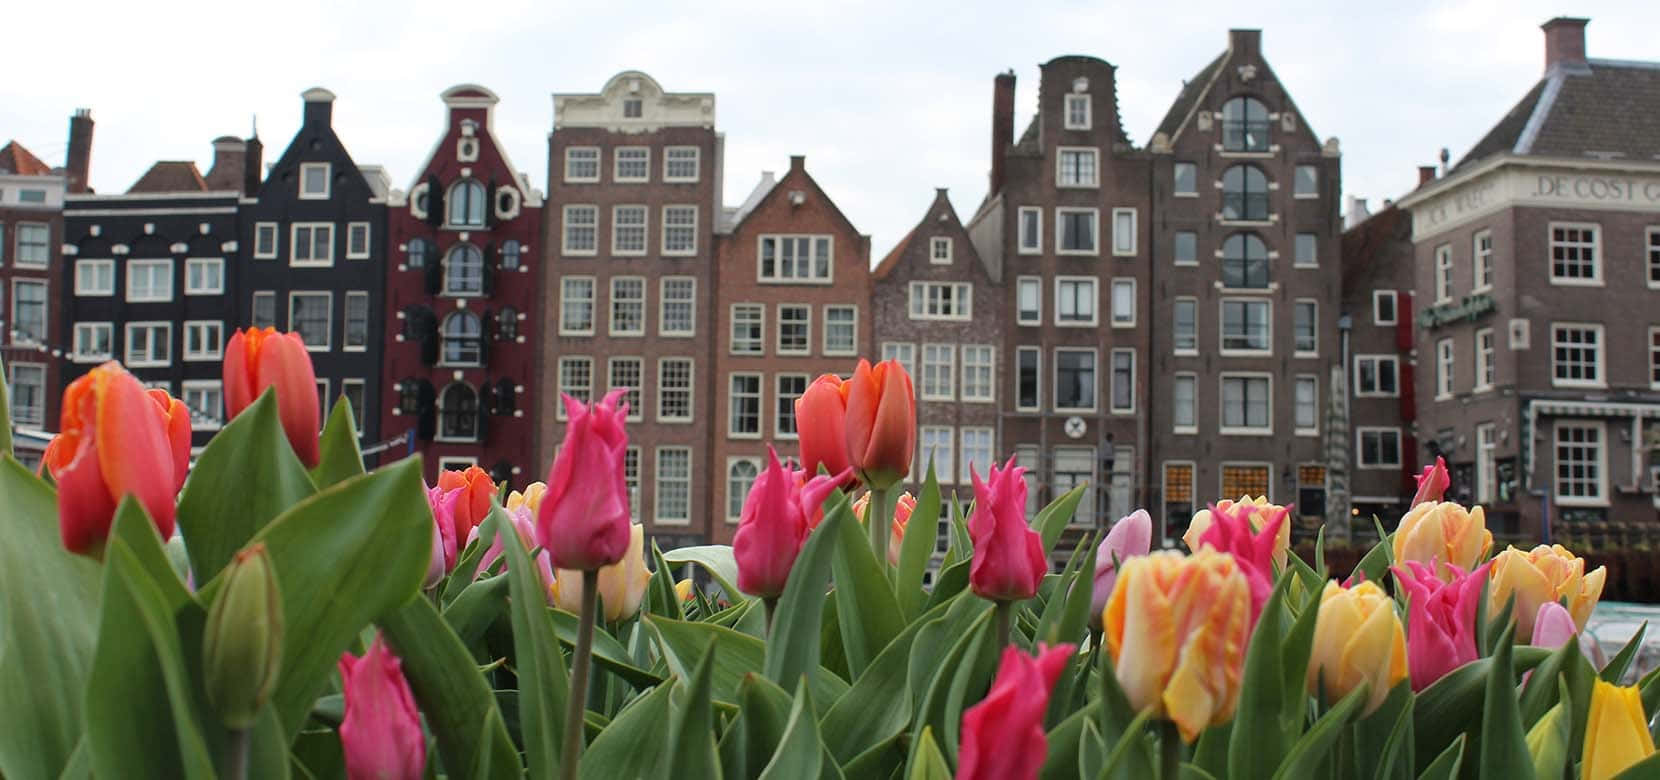 Tulips In Front Of Buildings In Amsterdam Wallpaper